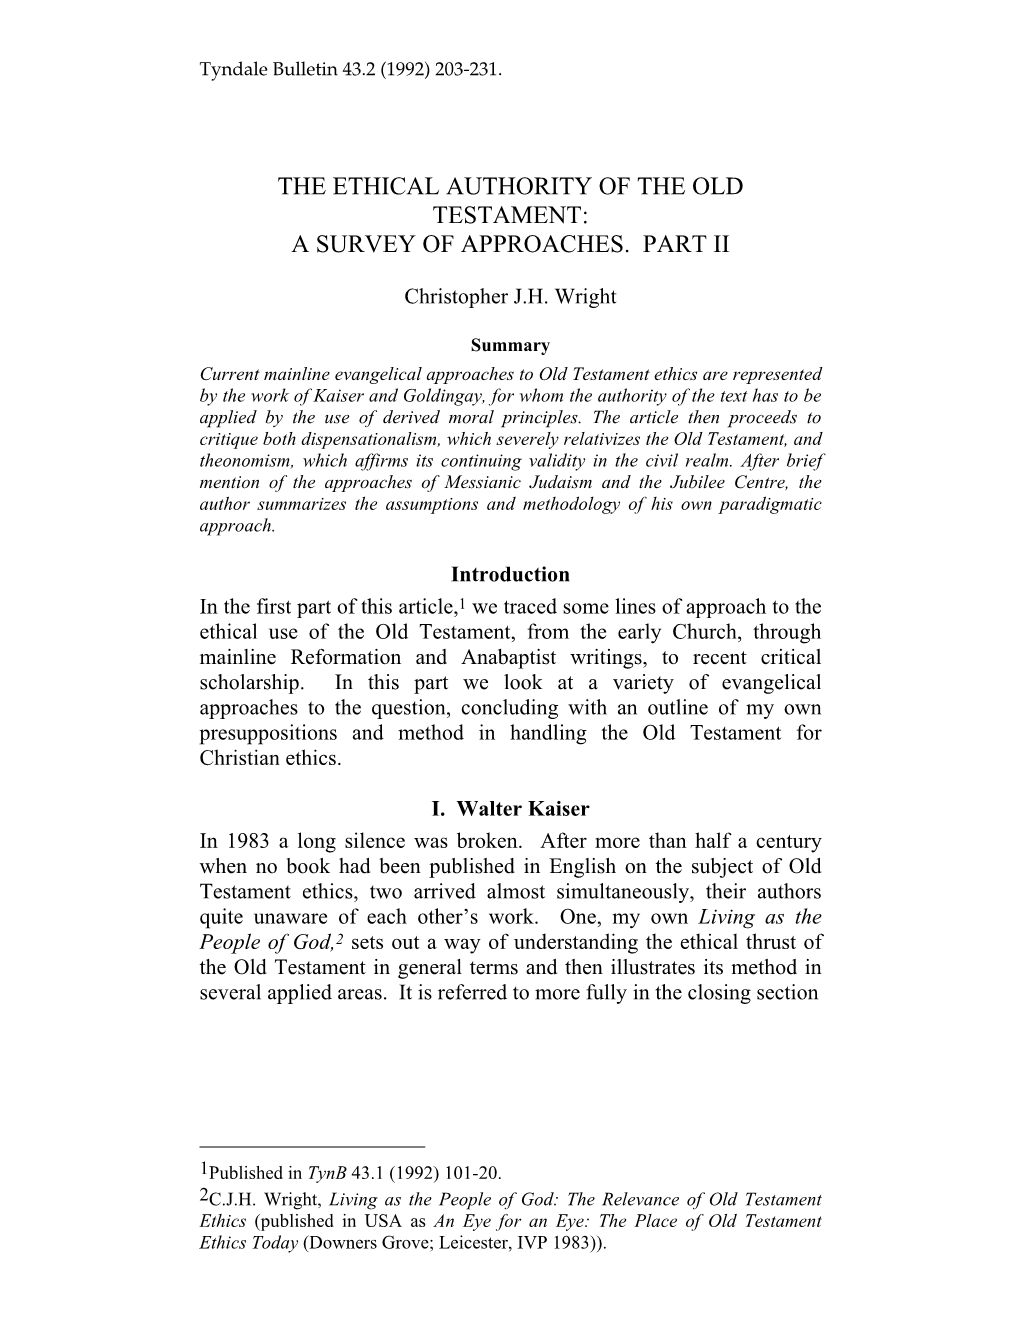 The Ethical Authority of the Old Testament: a Survey of Approaches